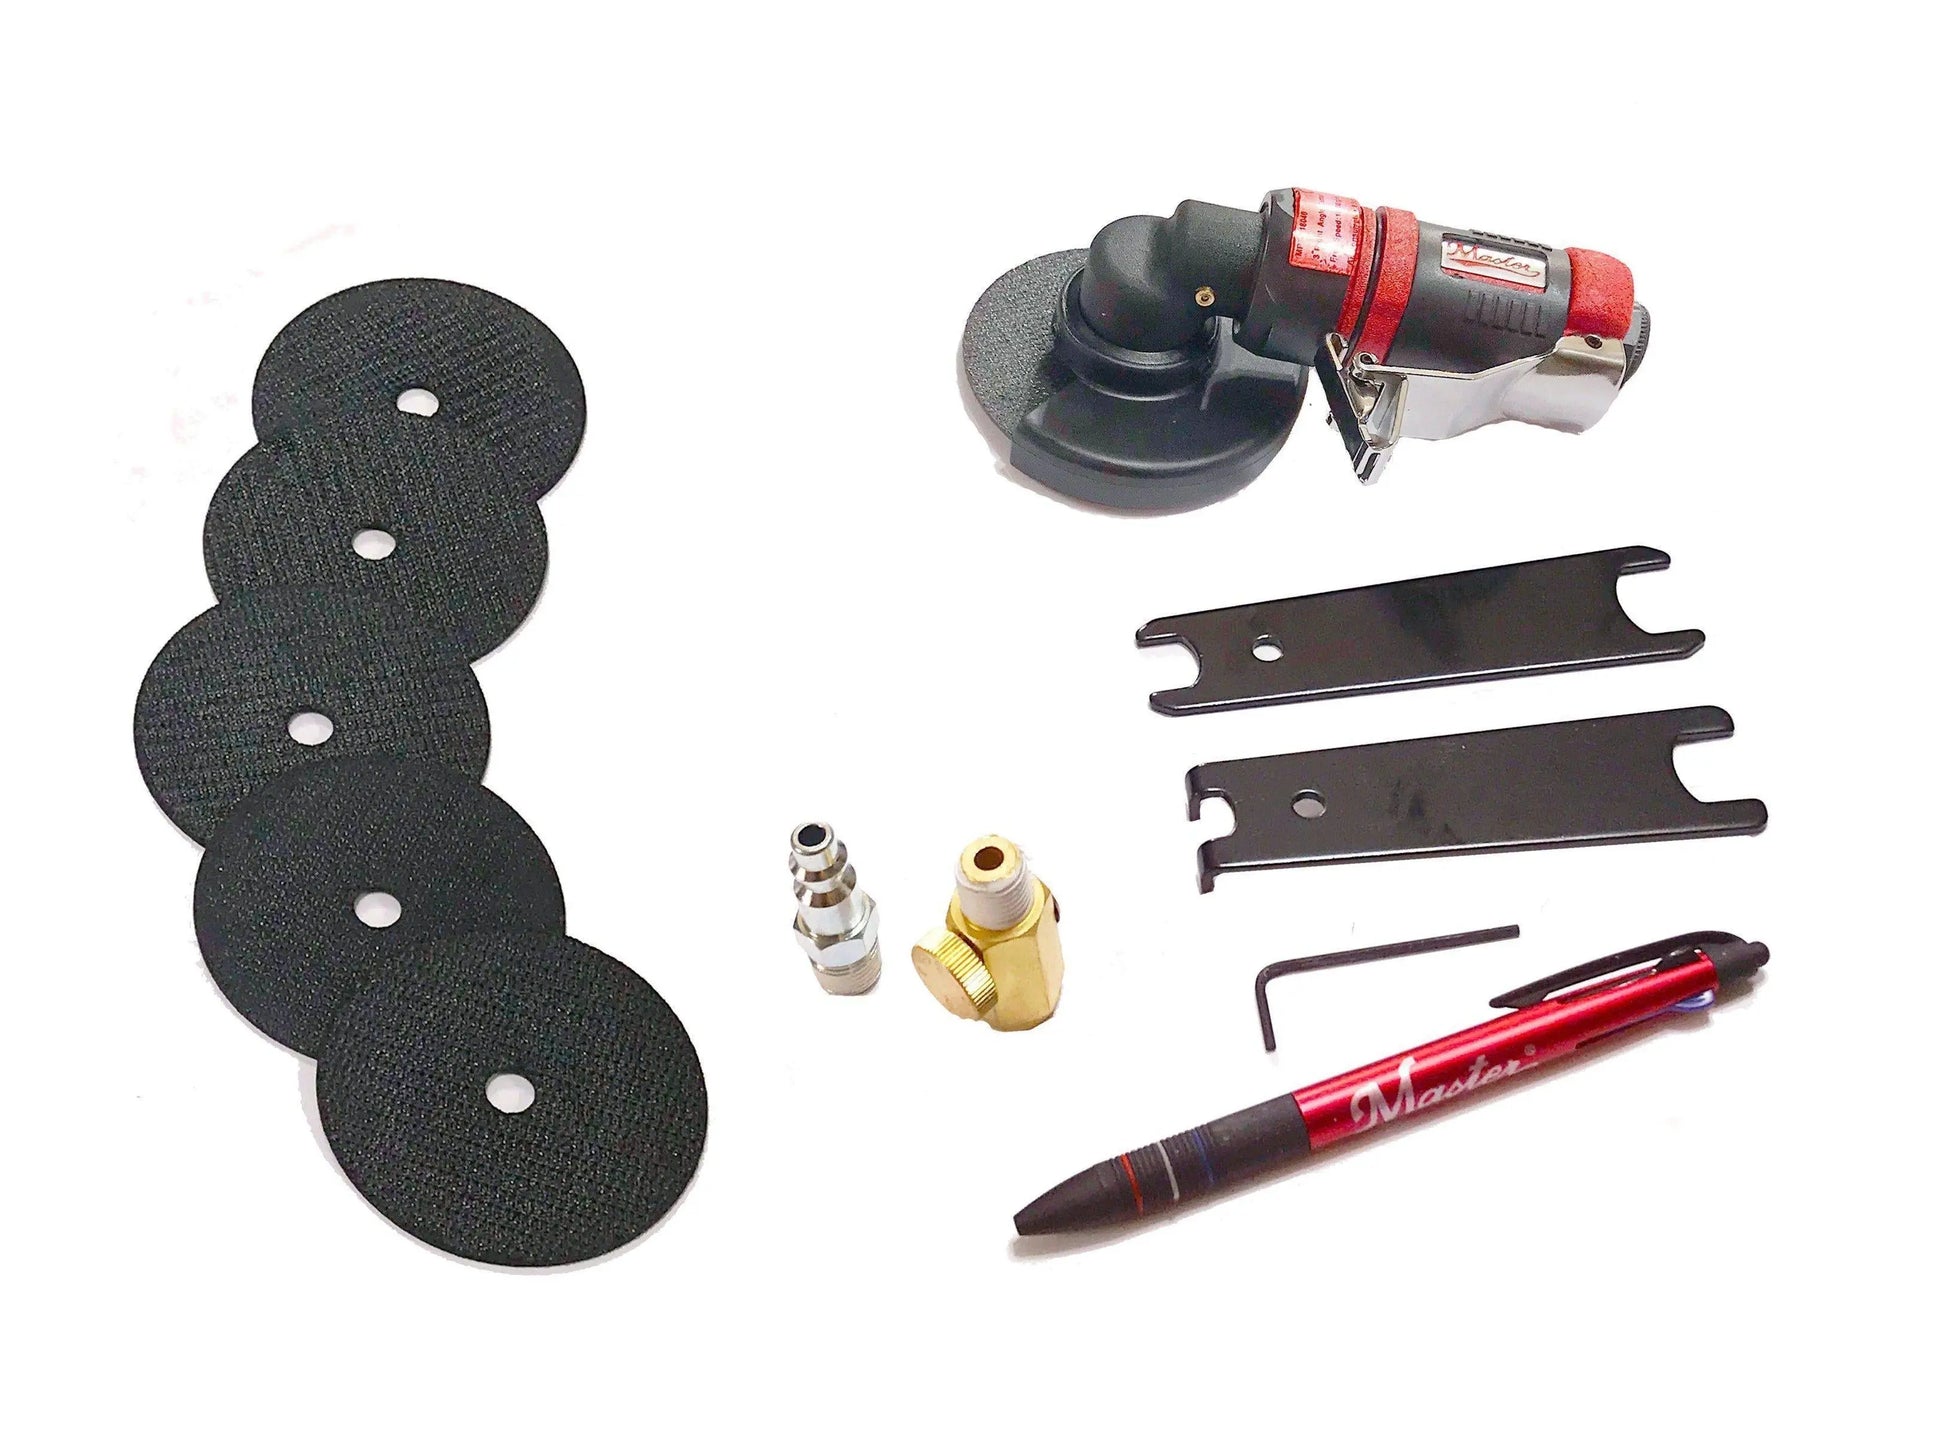 Small 3" Right Angle Cut-off Wheel Tool Set, 16500 Rpm, 18040 - 18040 - USD $250 - Master Palm Pneumatic